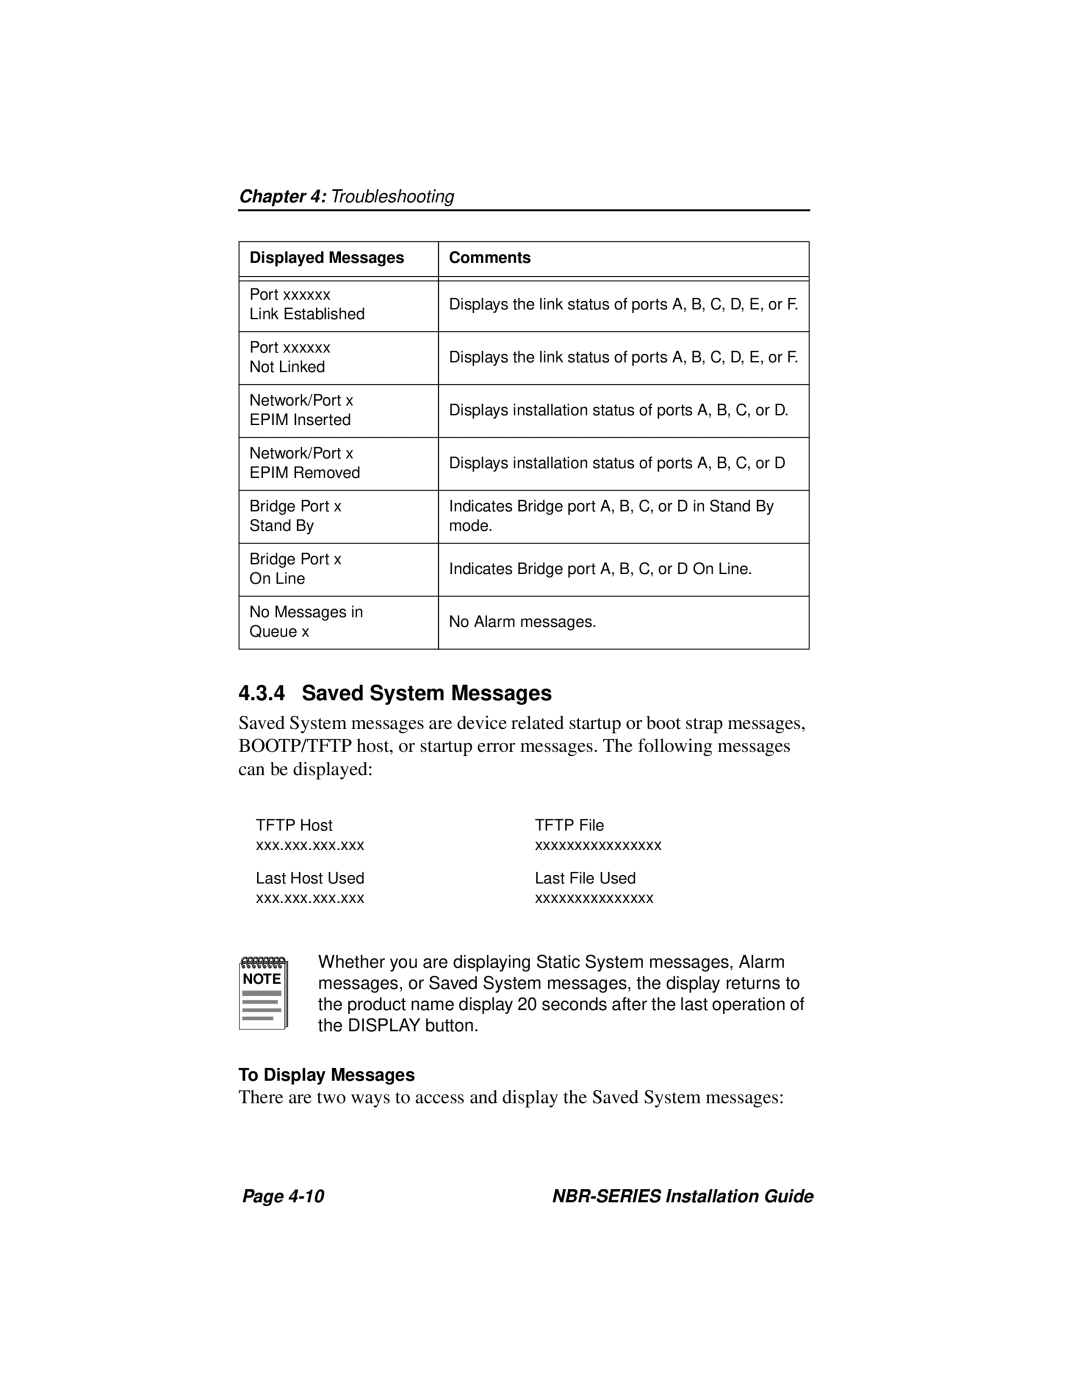 Cabletron Systems NBR-420 Saved System Messages, Troubleshooting, To Display Messages, Page, NBR-SERIES Installation Guide 